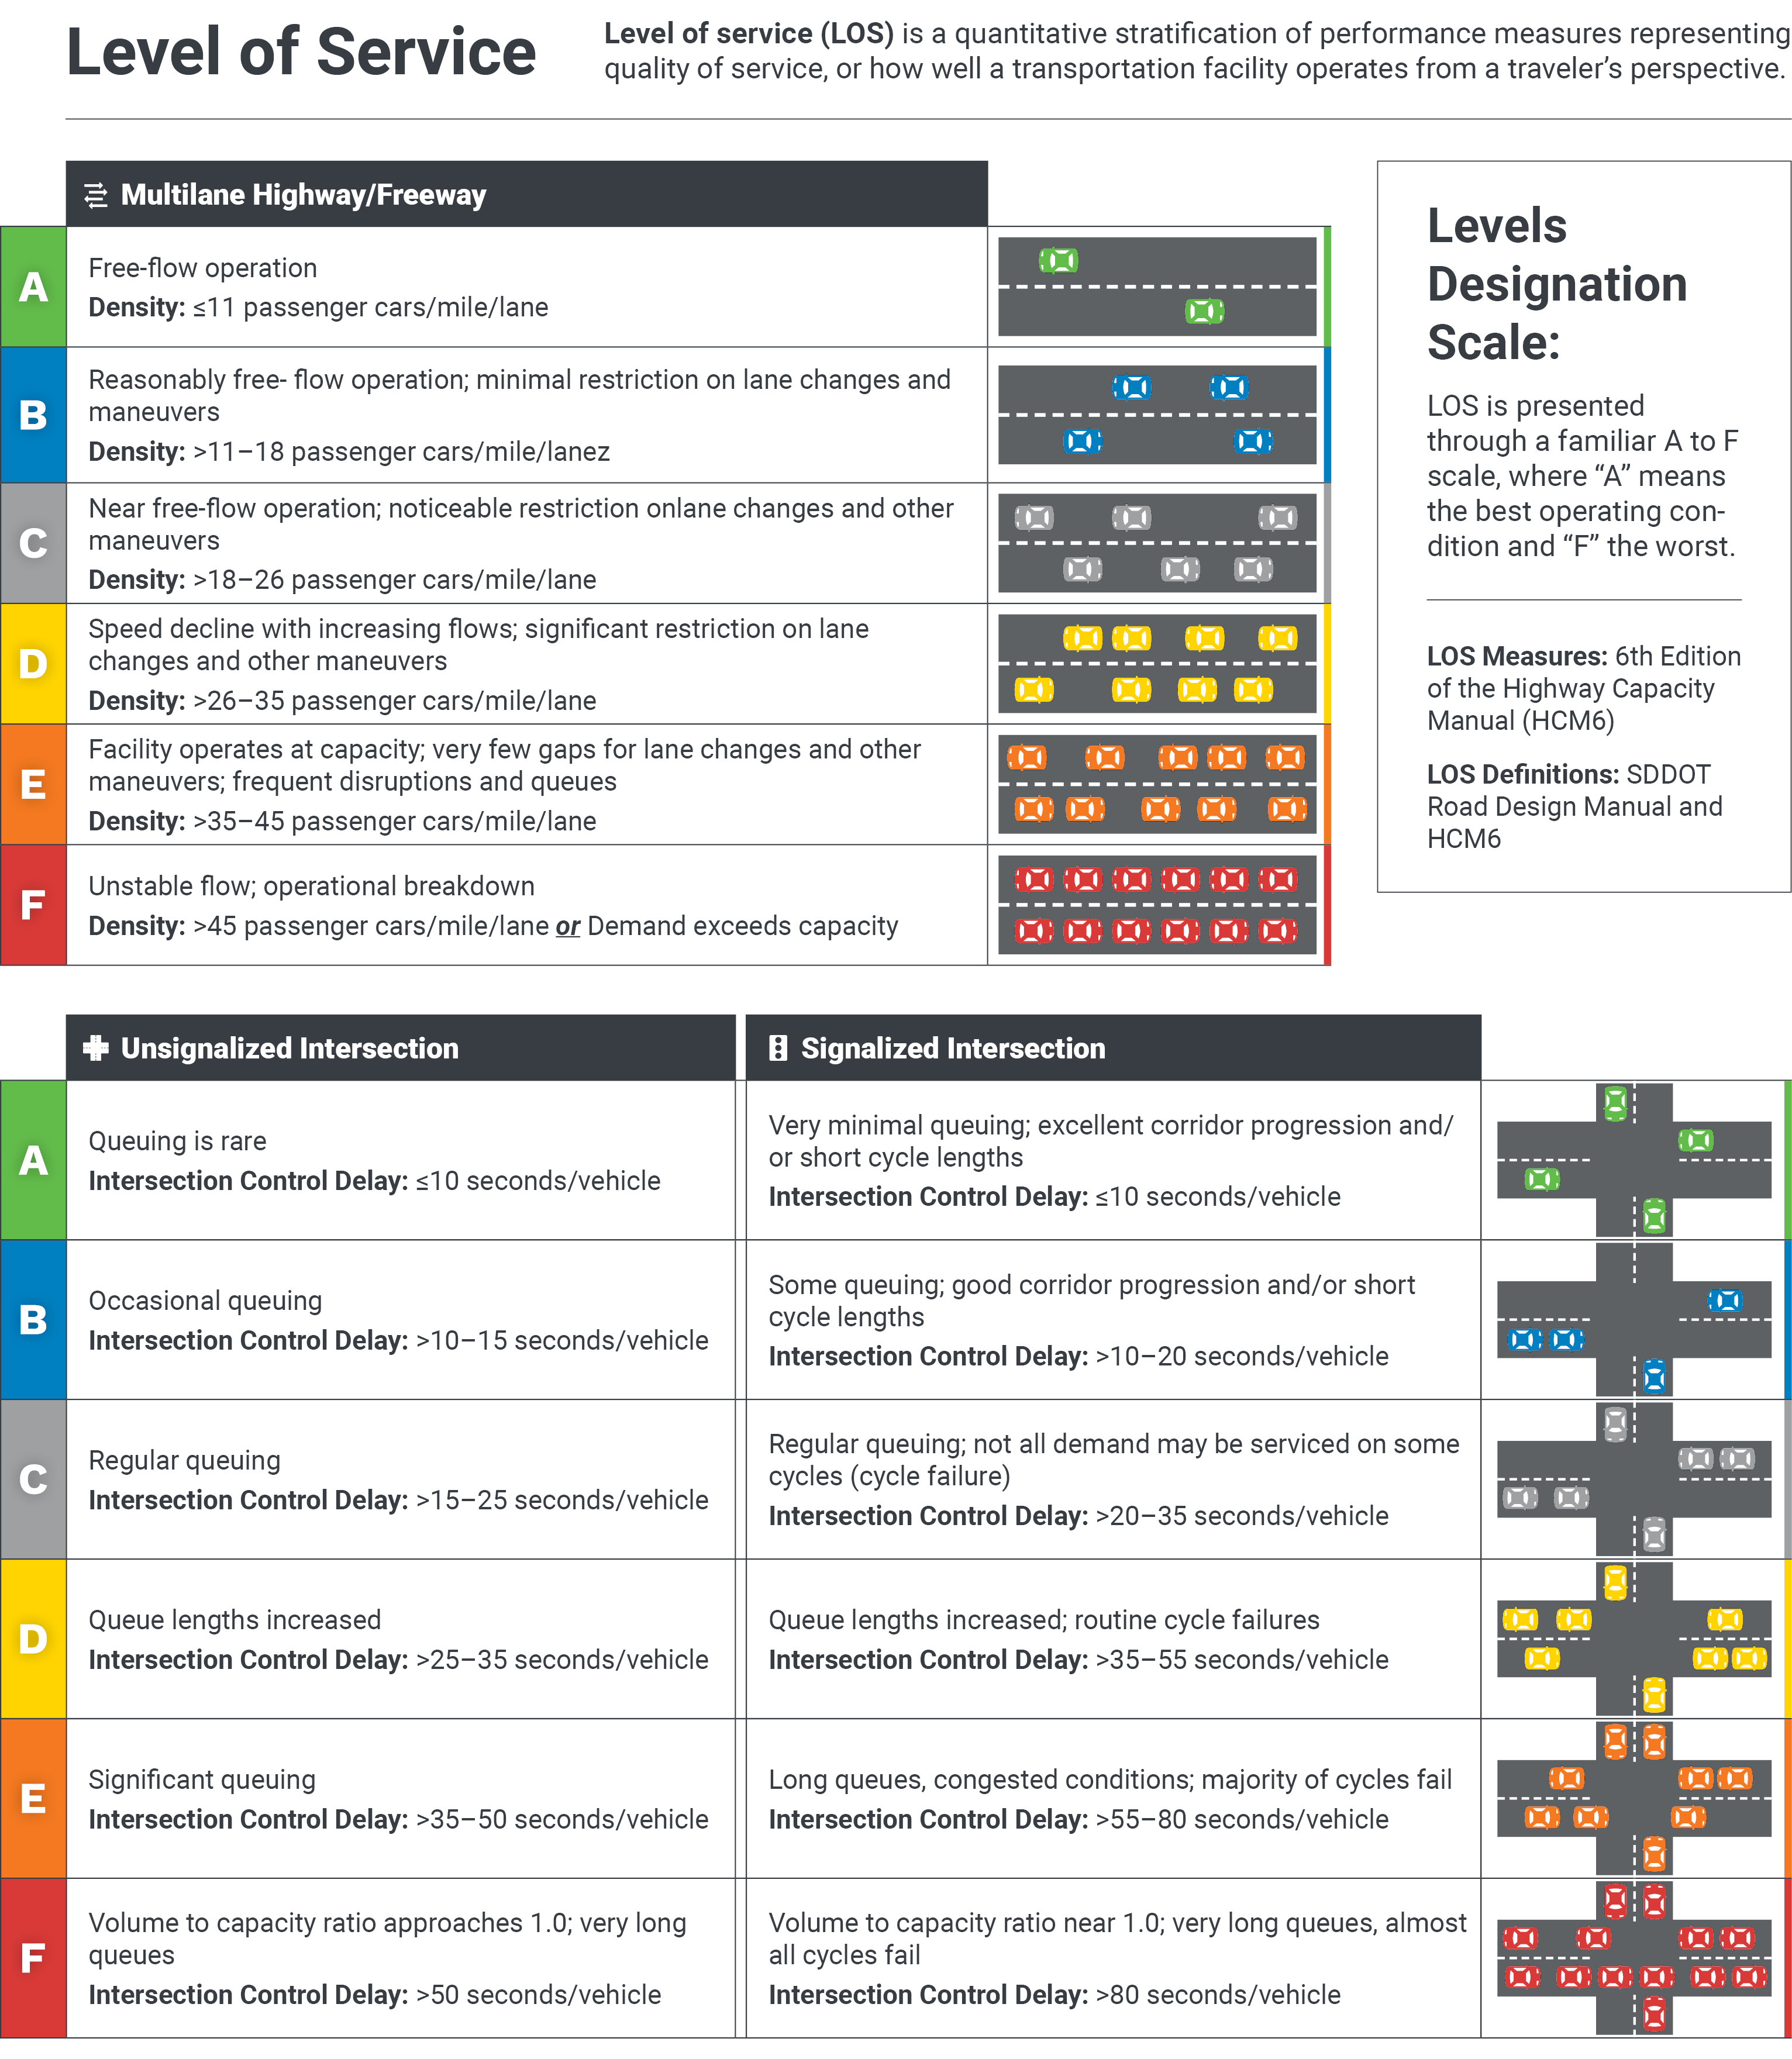 The Level of Service table shows the ratings of density of multi-lane highways and freeways. Ratings are also provided for intersection control delays in unsignalized and signalized intersections. 